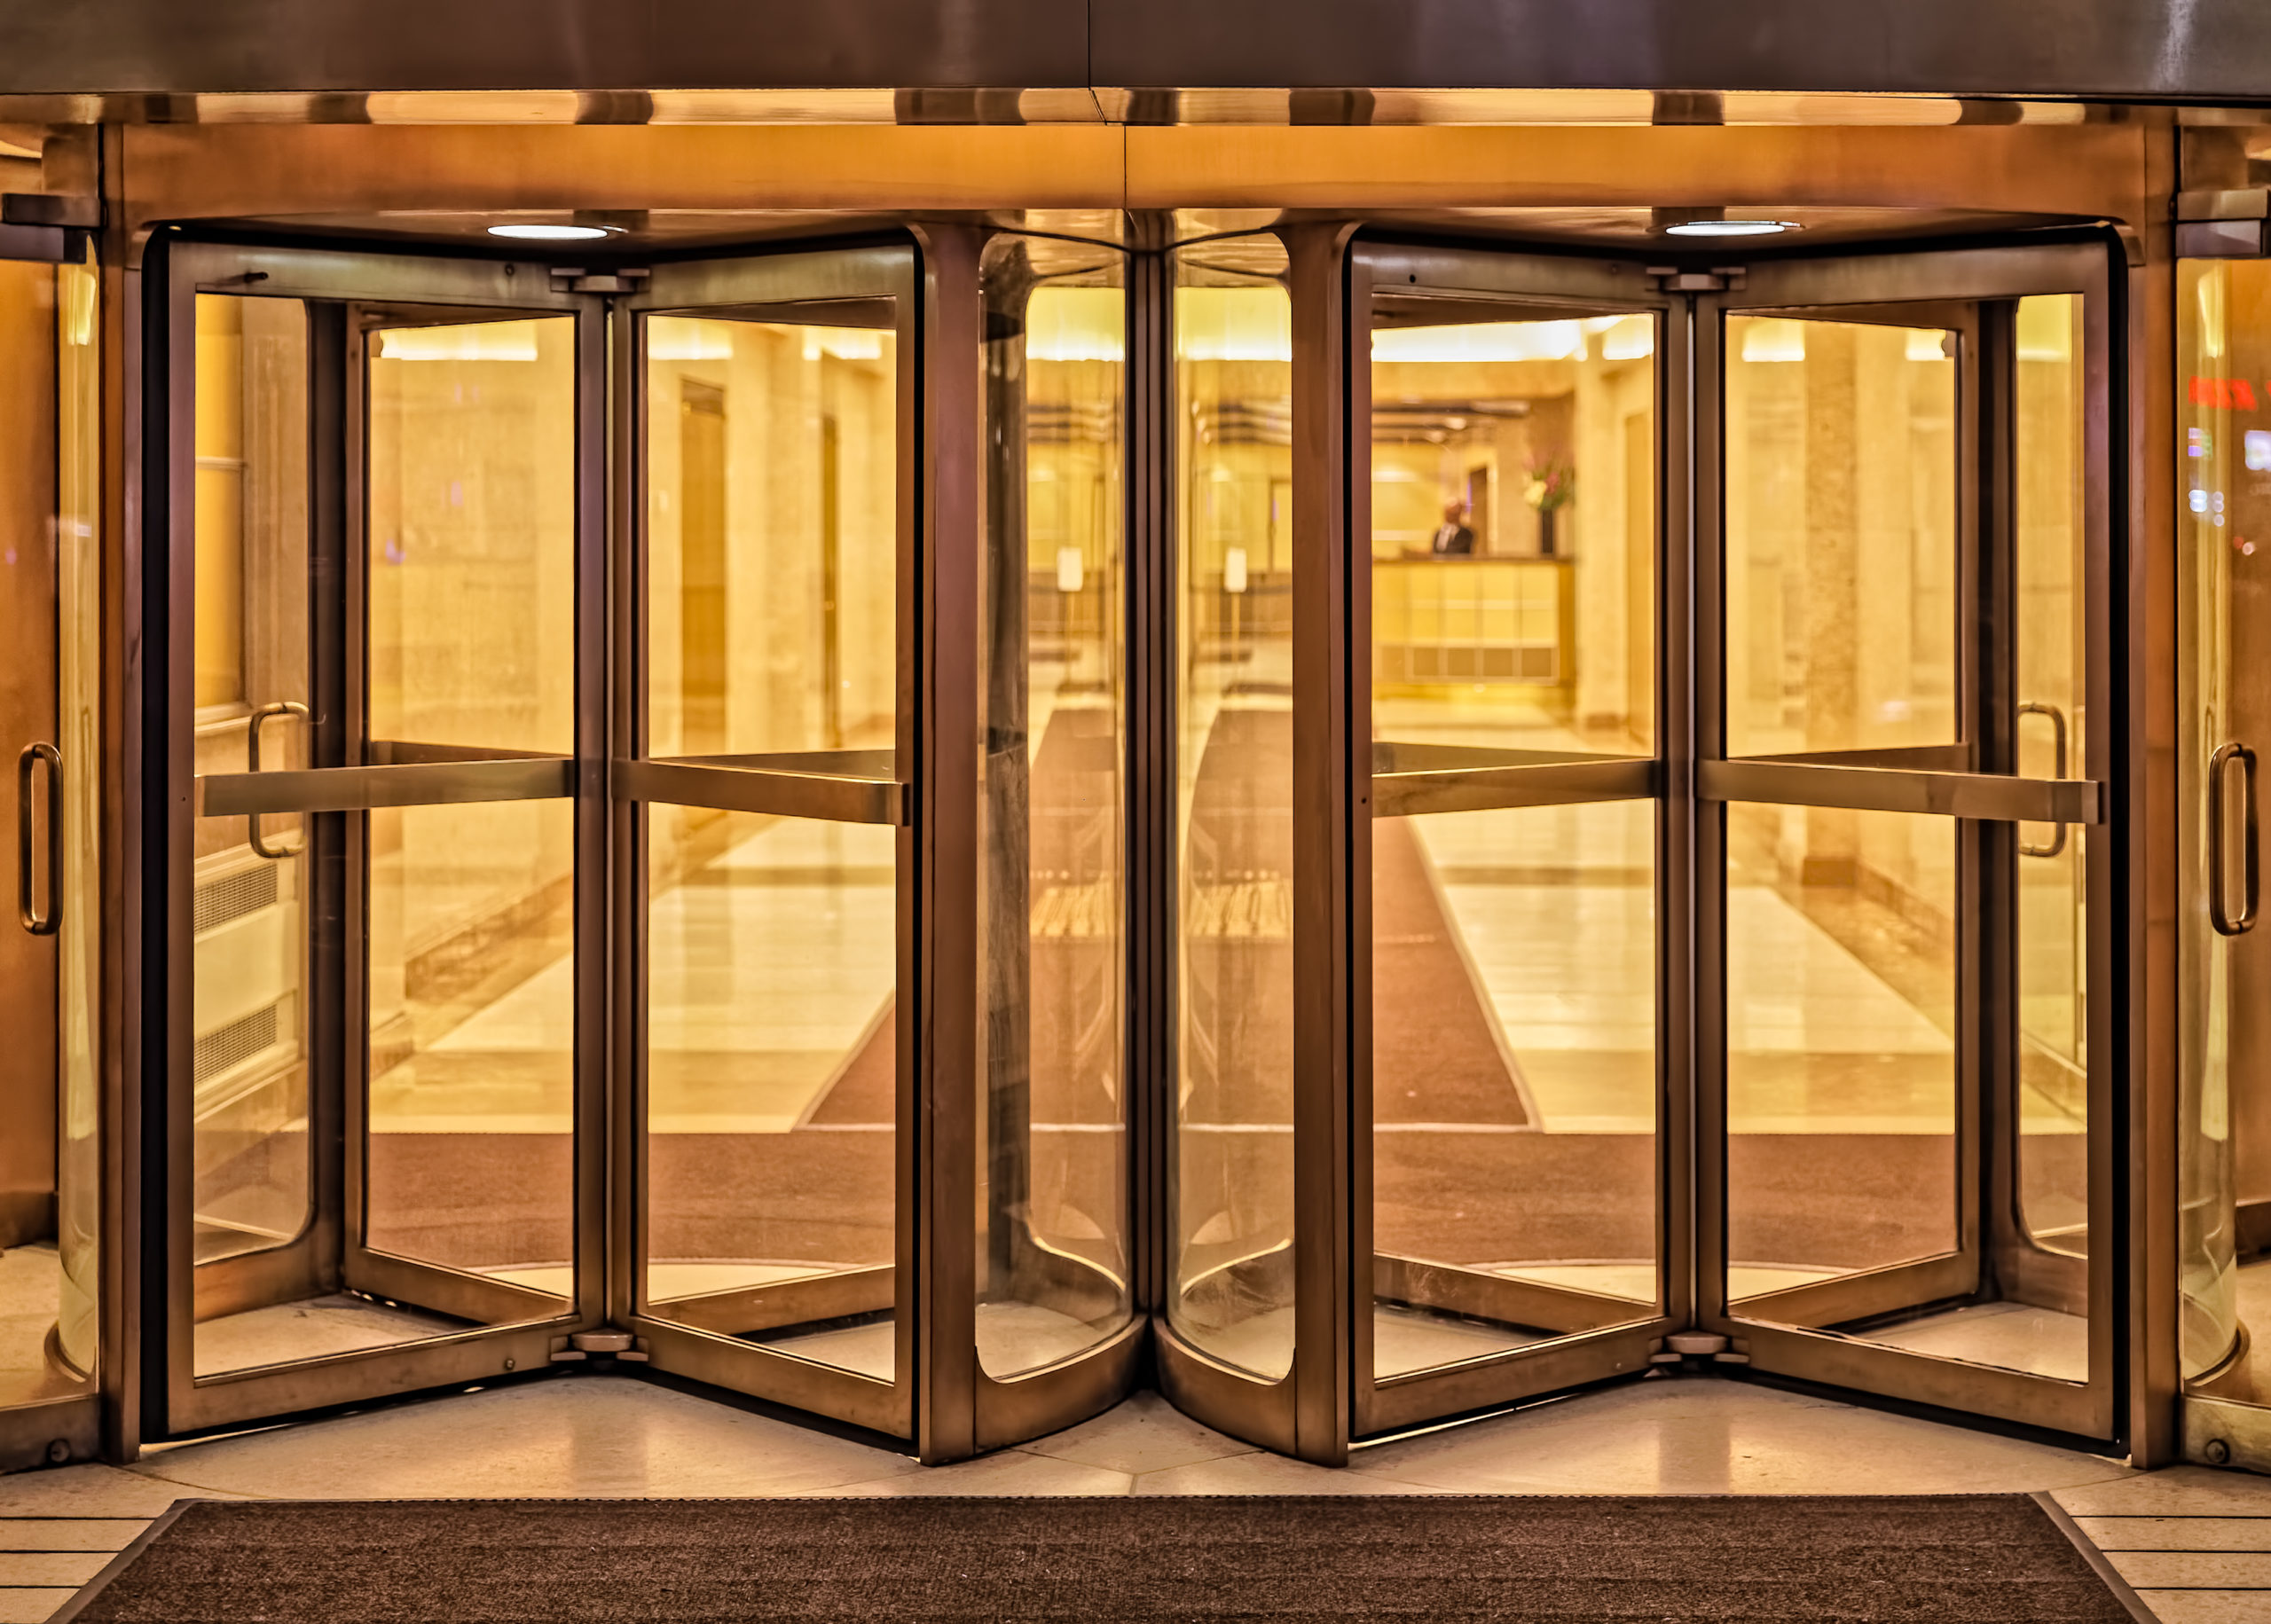 Revolving doors offer entrance to an office building